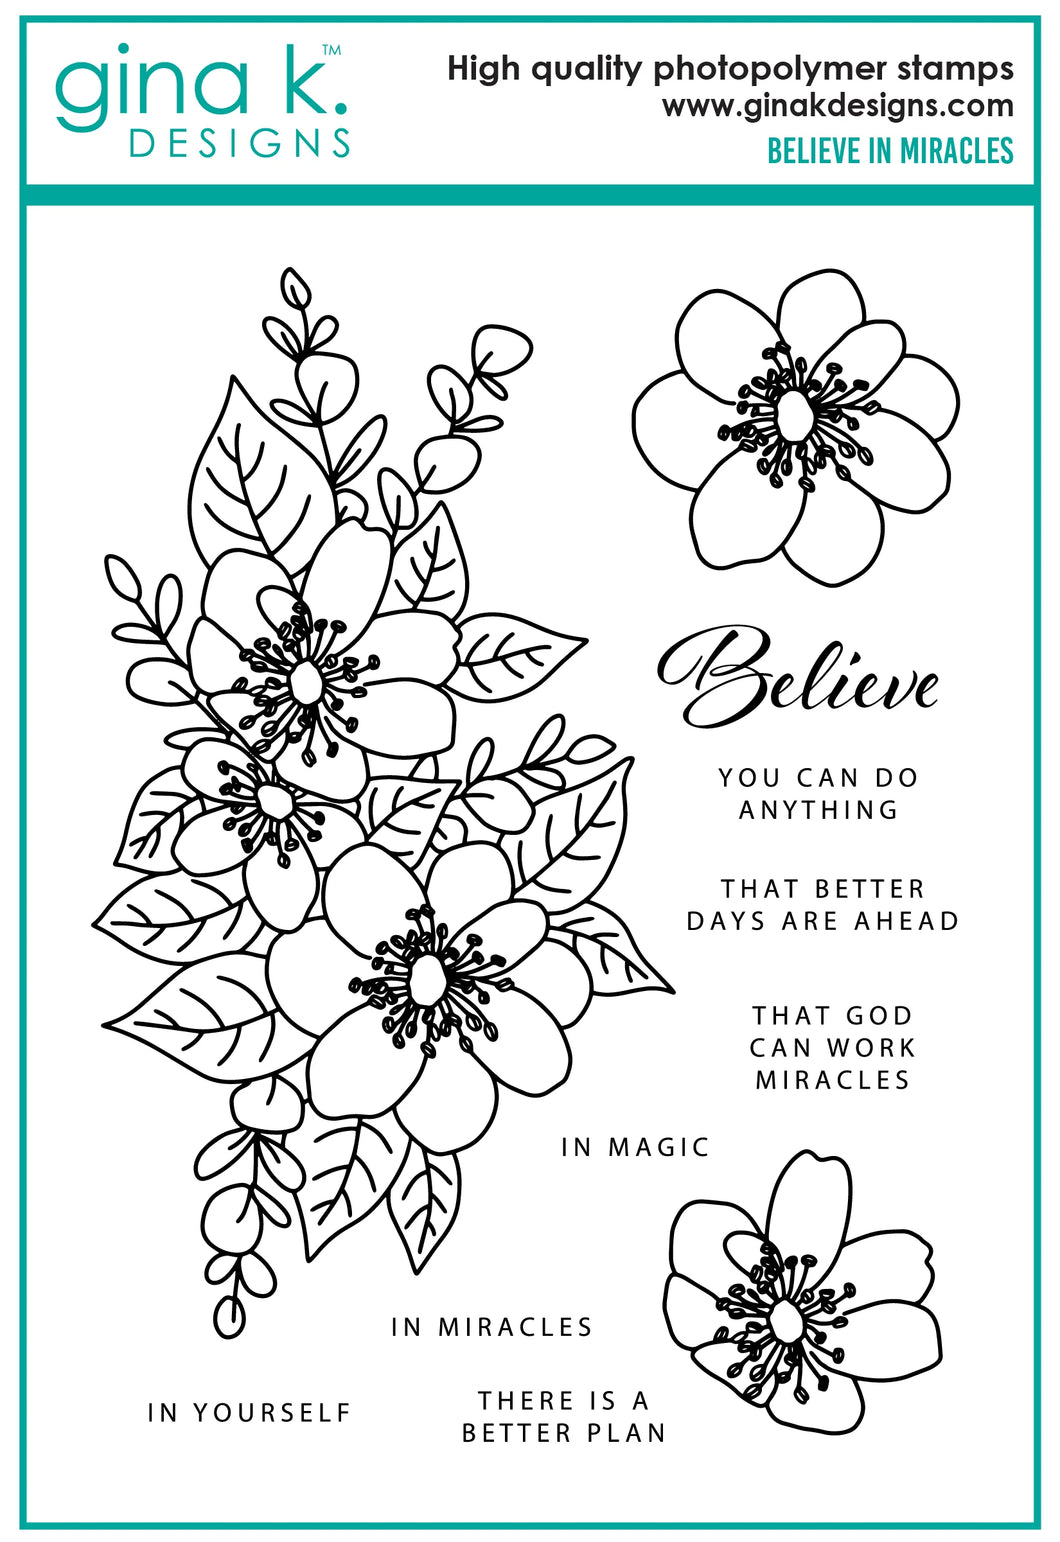 Gina K. Designs - Stamp & Die Set - Believe in Miracles. Believe in Miracles is a set by Arjita Singh. This set is made of premium clear photopolymer and measures 6